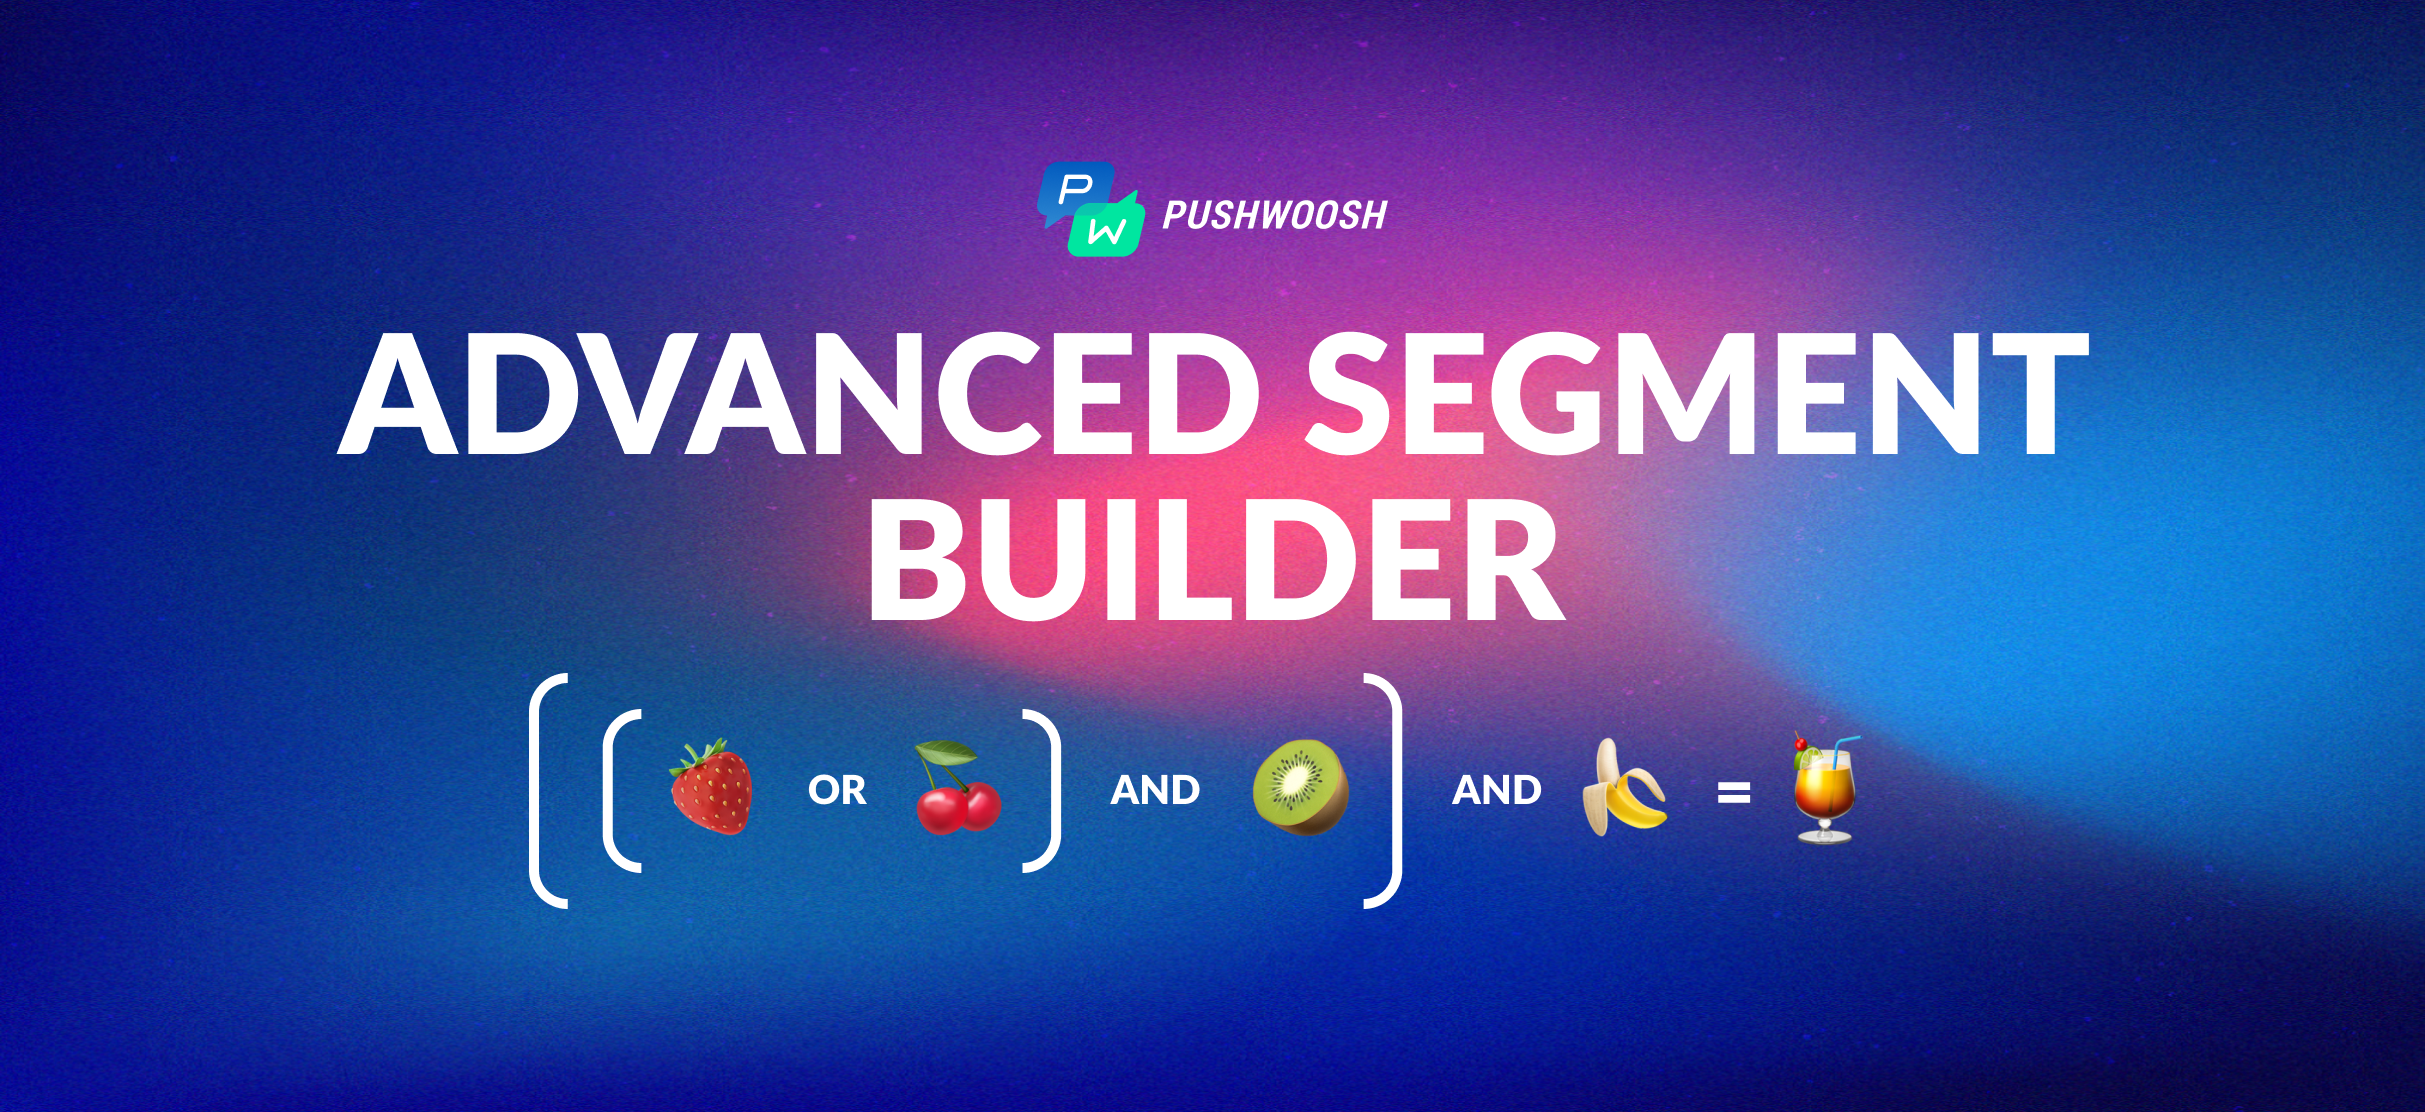 Advanced Segment Builder in Pushwoosh: Make Your Targeting Precise as Never Before